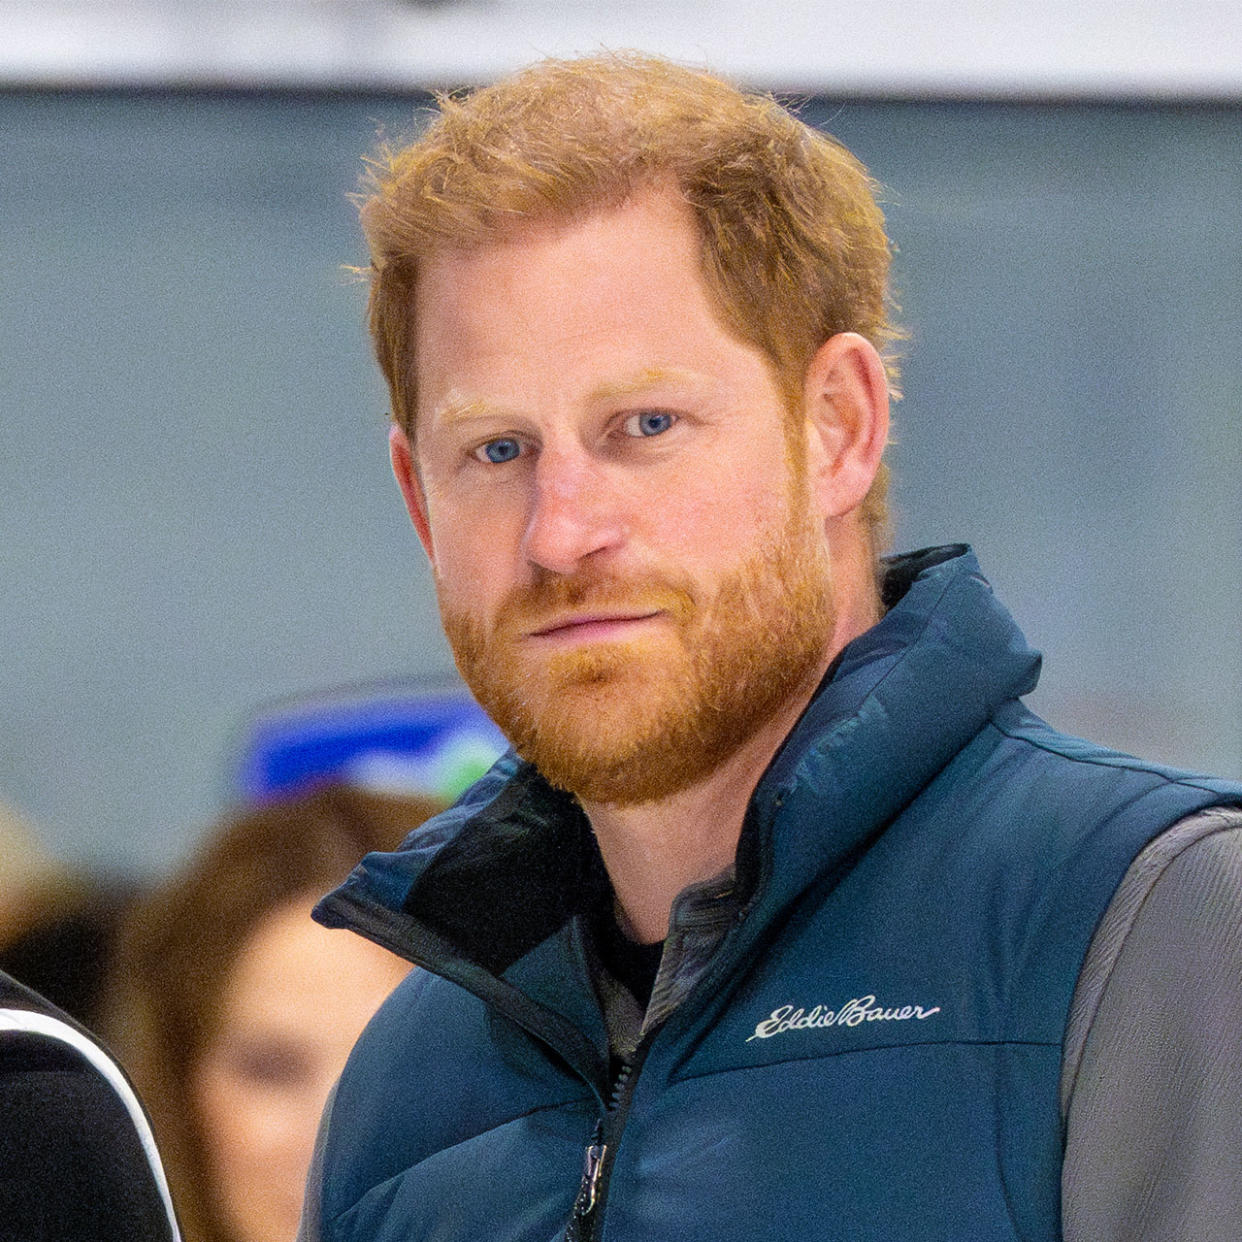 Prince Harry final day One Year to Go event in Vancouver